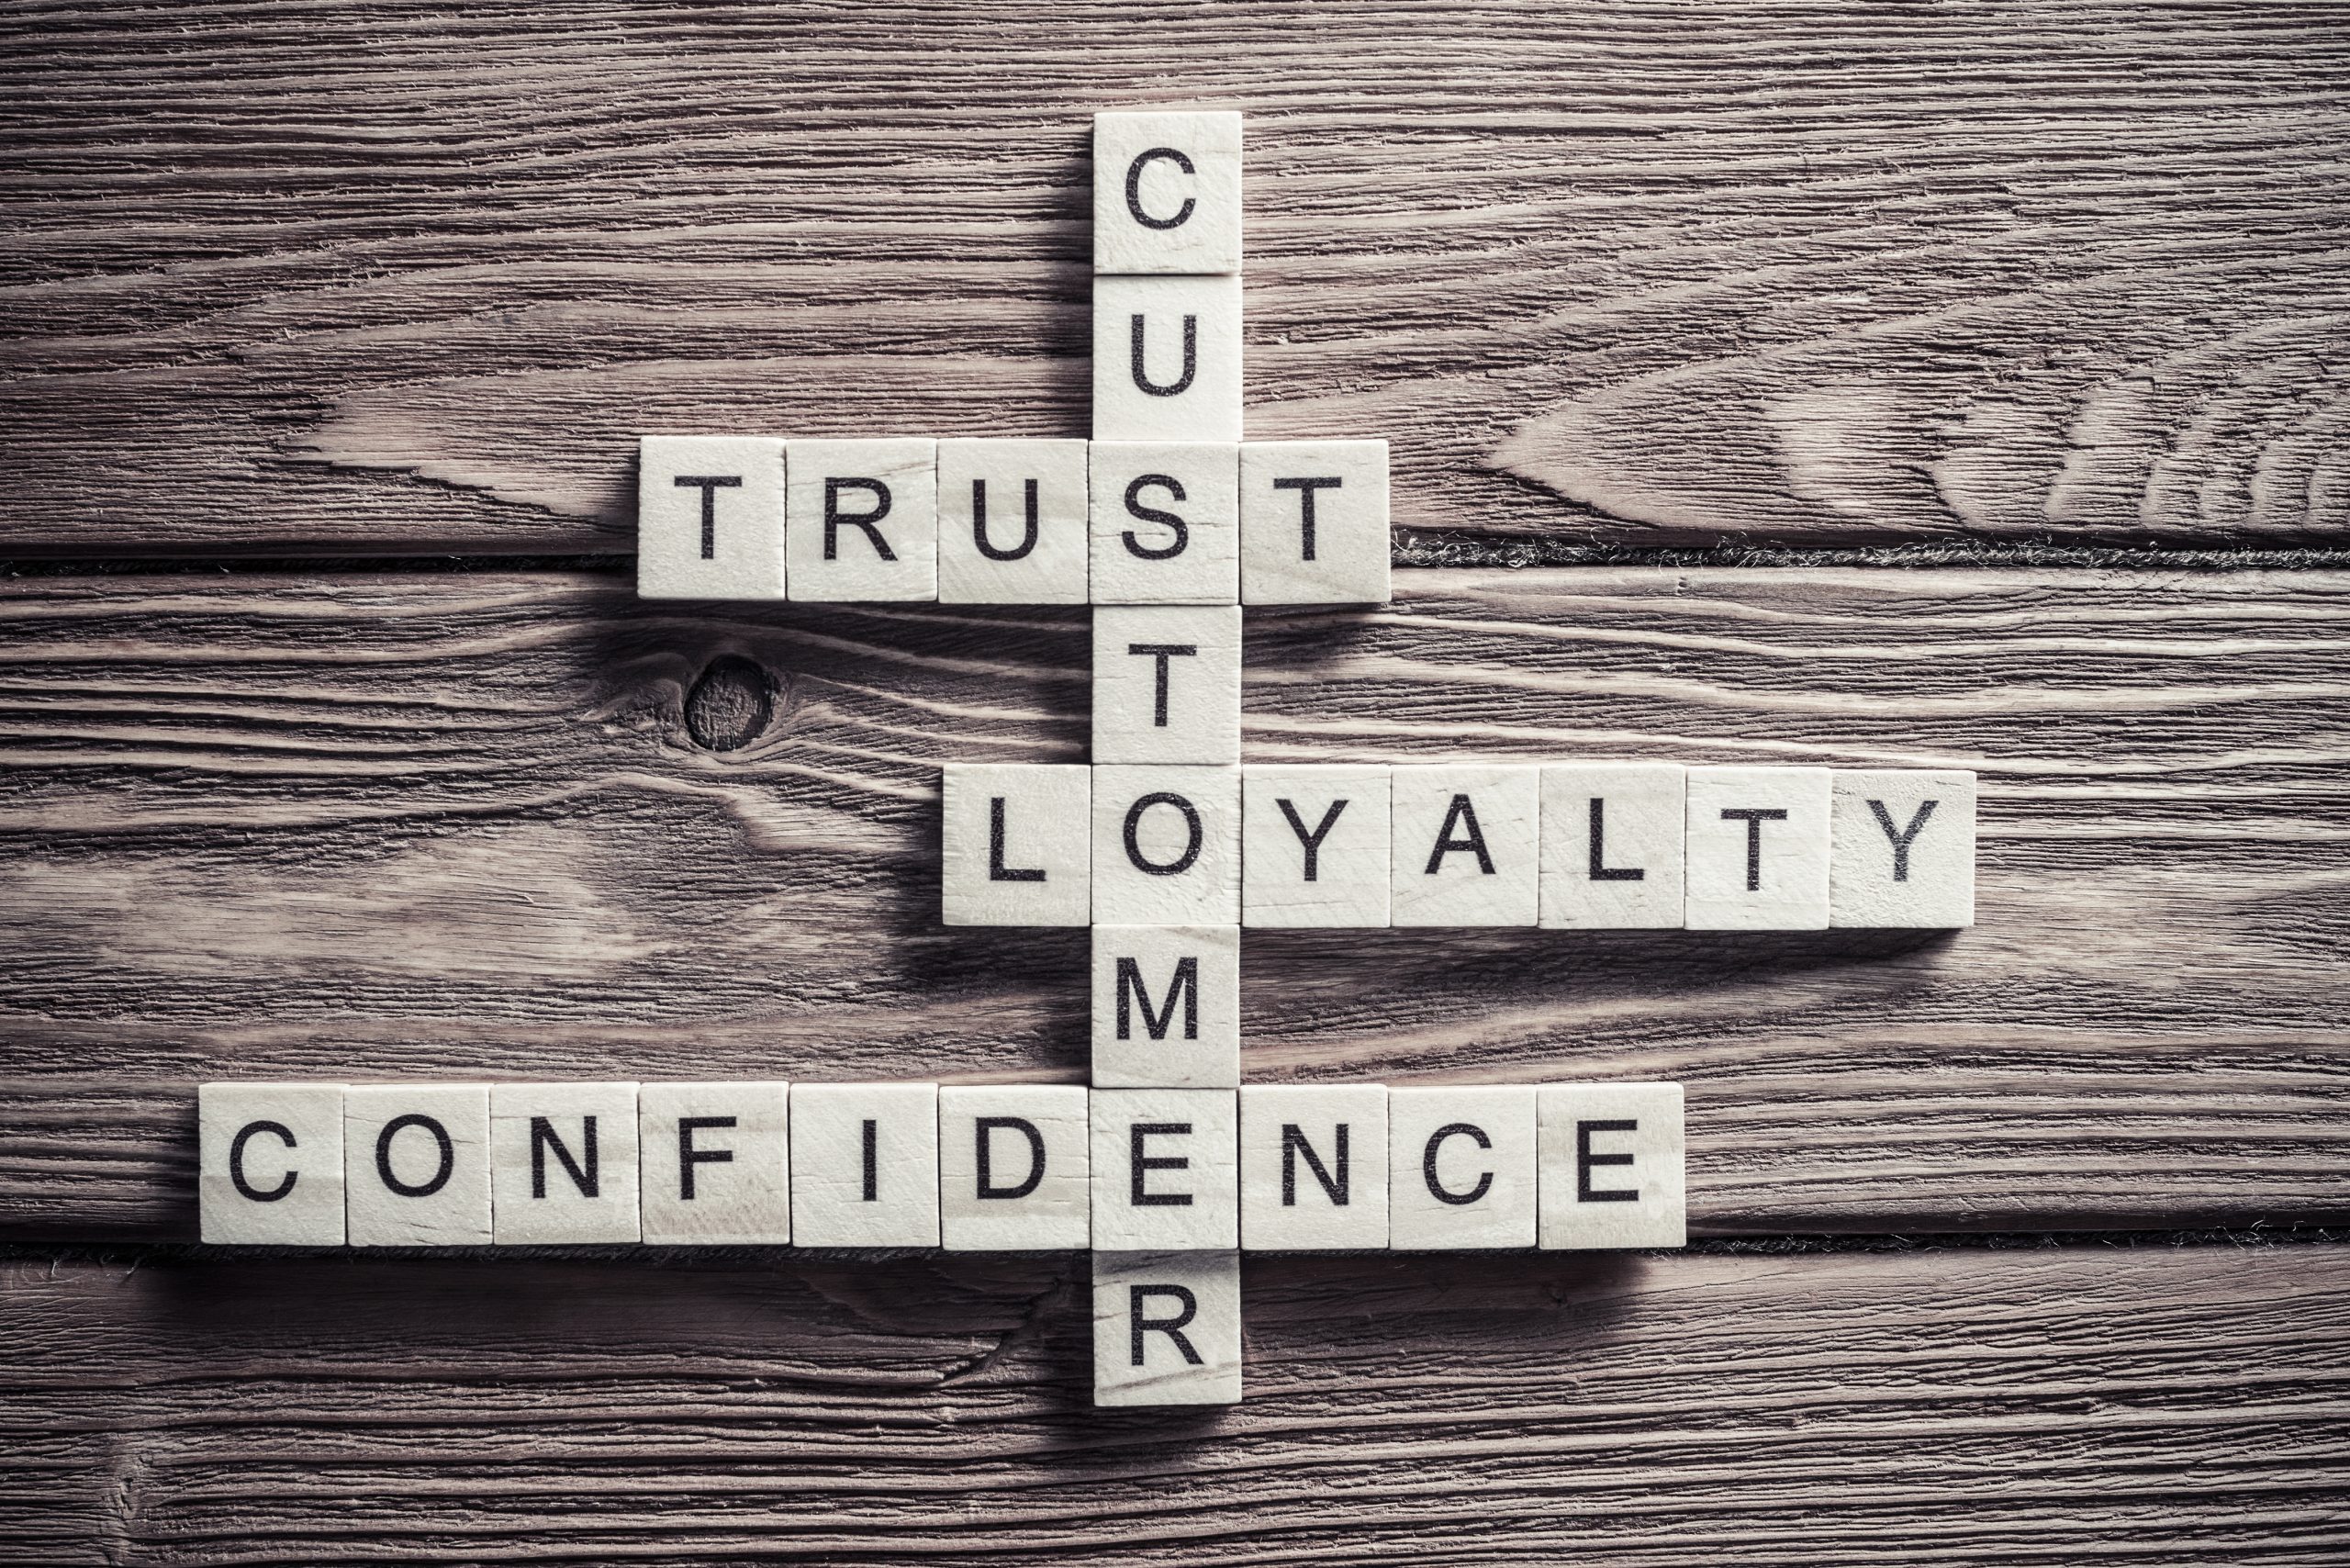 5 Tips for Building Brand Loyalty⠀